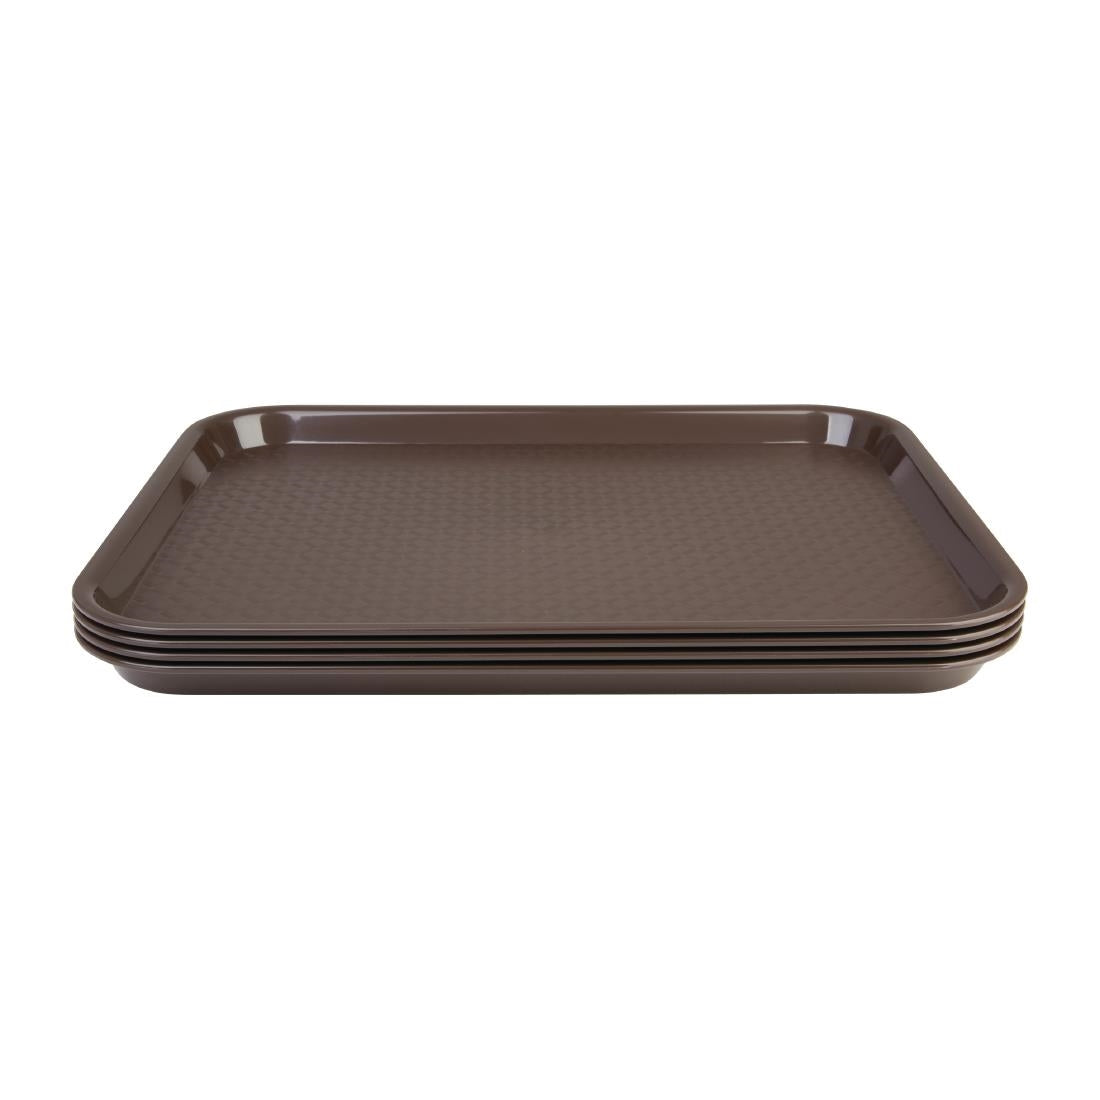 DP218 Kristallon Small Polypropylene Fast Food Tray Brown 345mm JD Catering Equipment Solutions Ltd